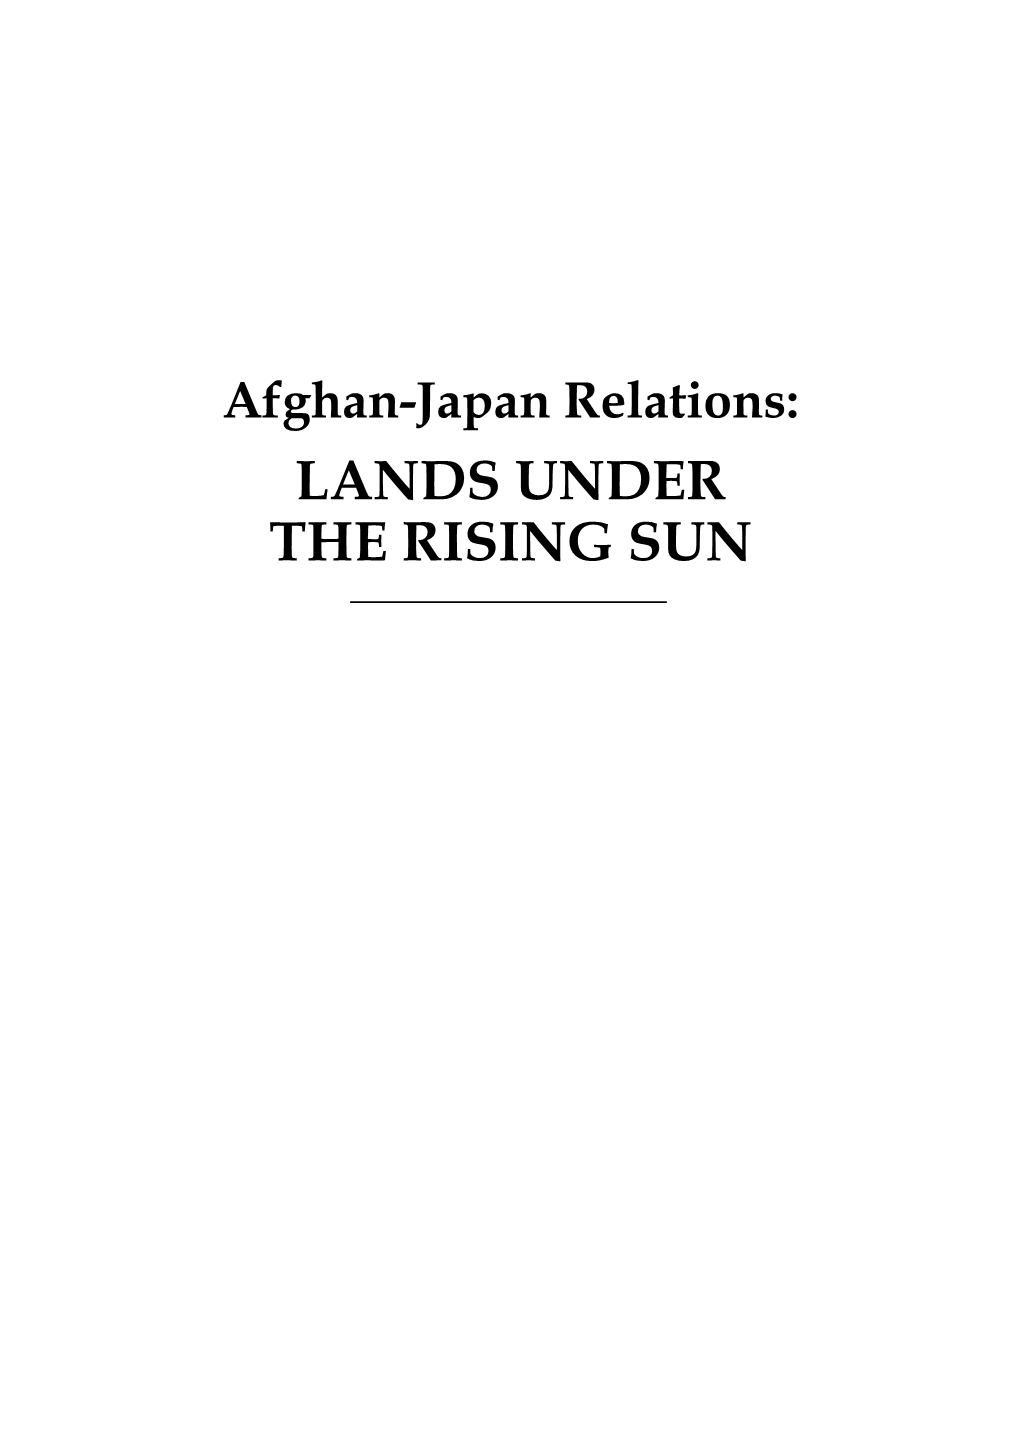 Afghan-Japan Relations: Lands Under “The Rising Sun”